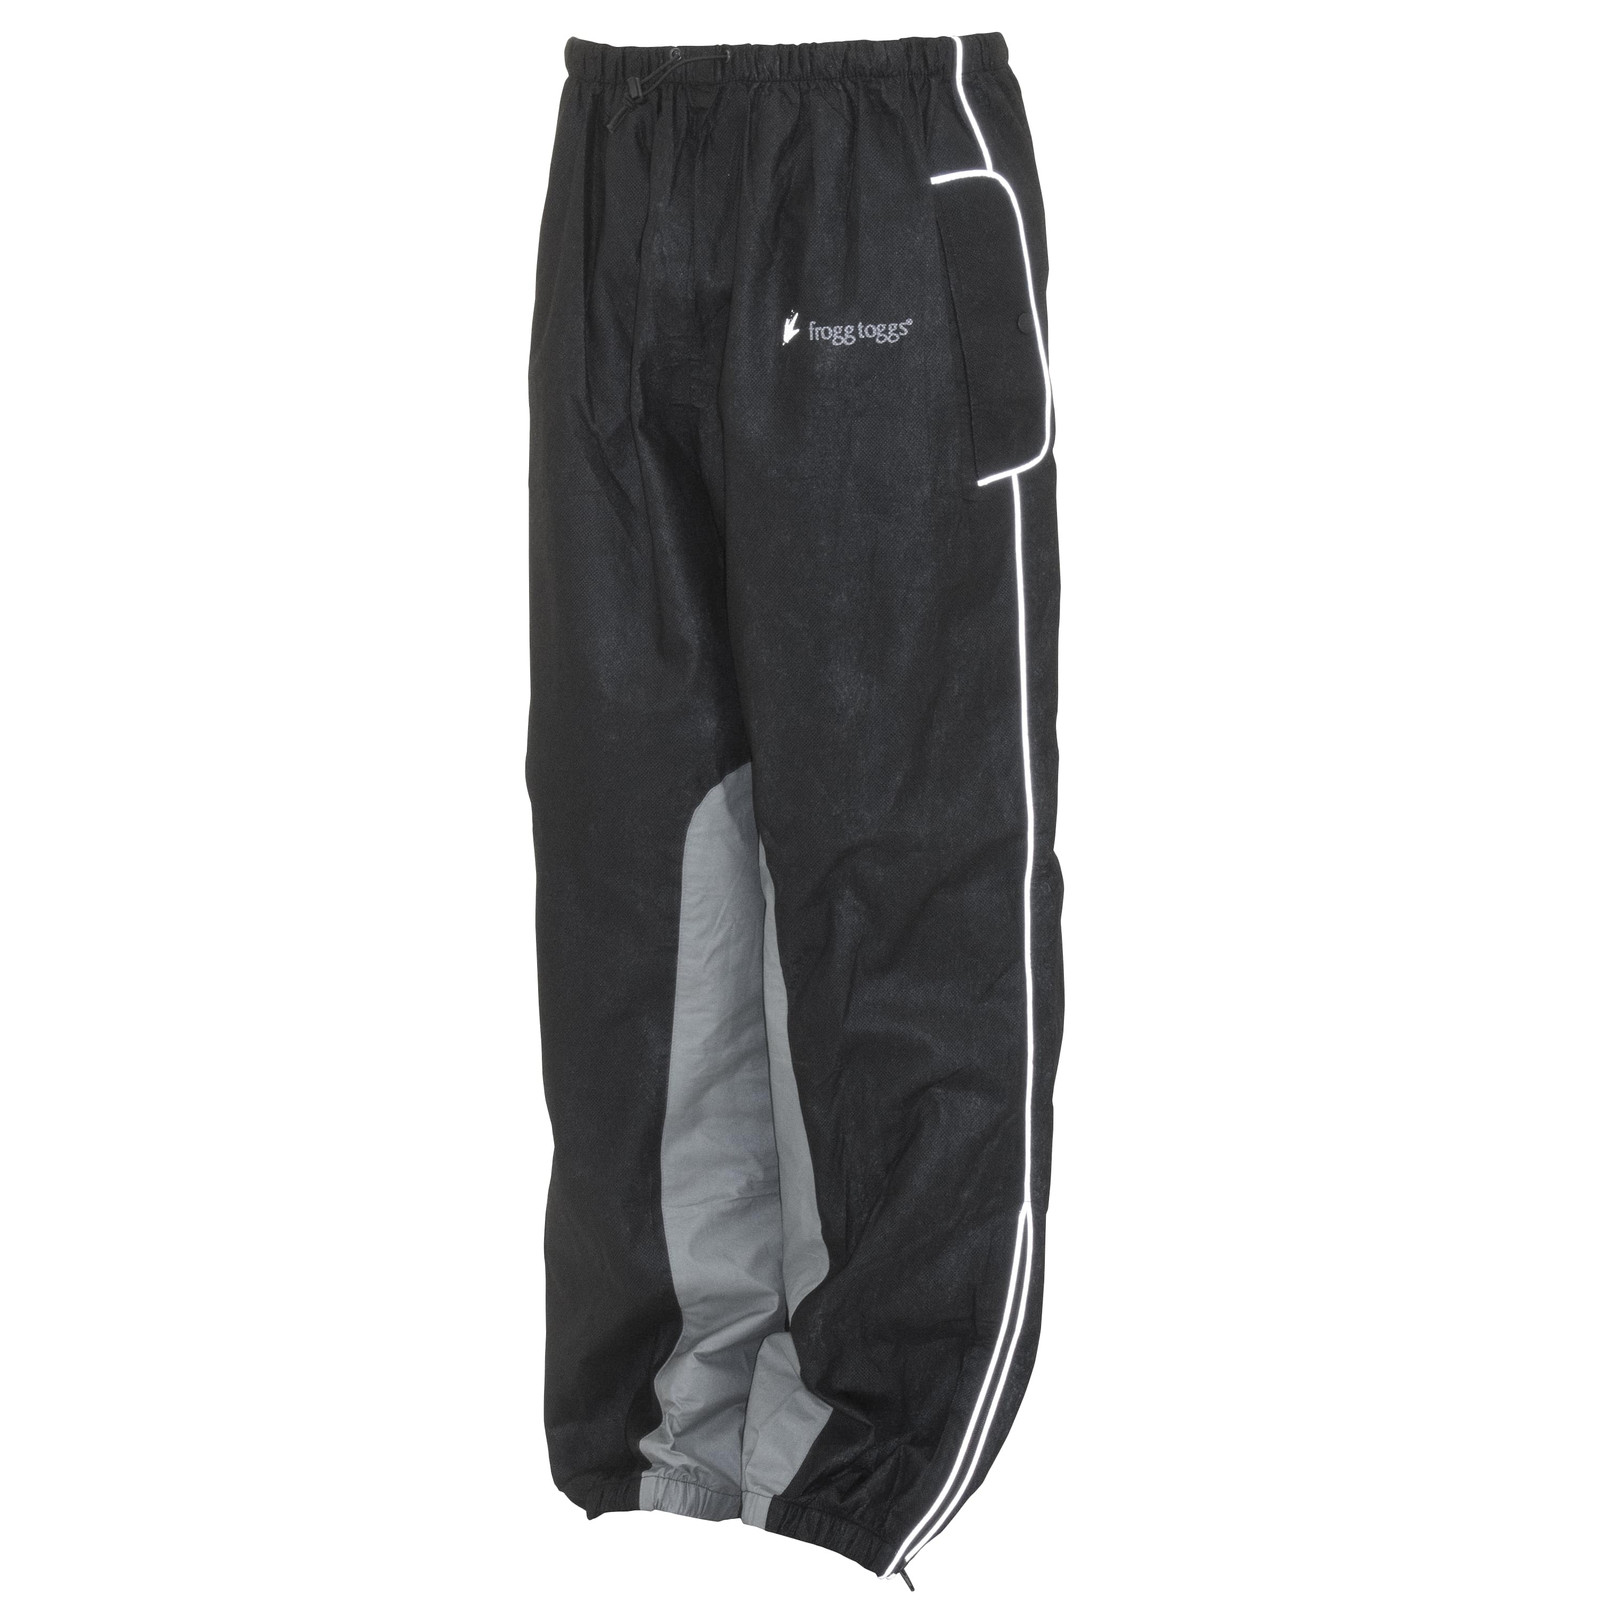 Women's Road Toad Reflective Pants